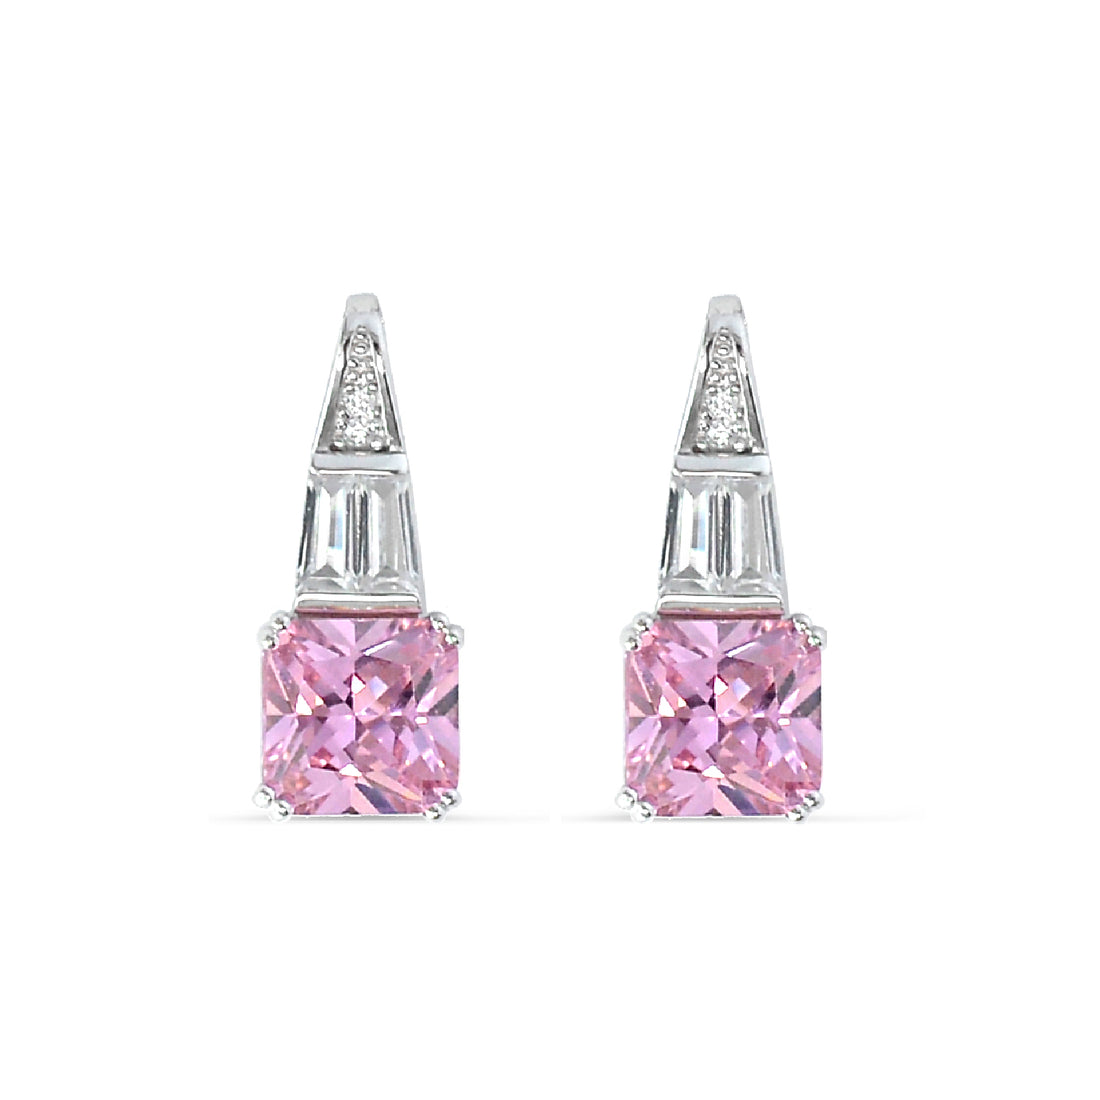 Exquisite Earrings Silver 925 triangle shape with High Quality Square Pink Zirconia stones